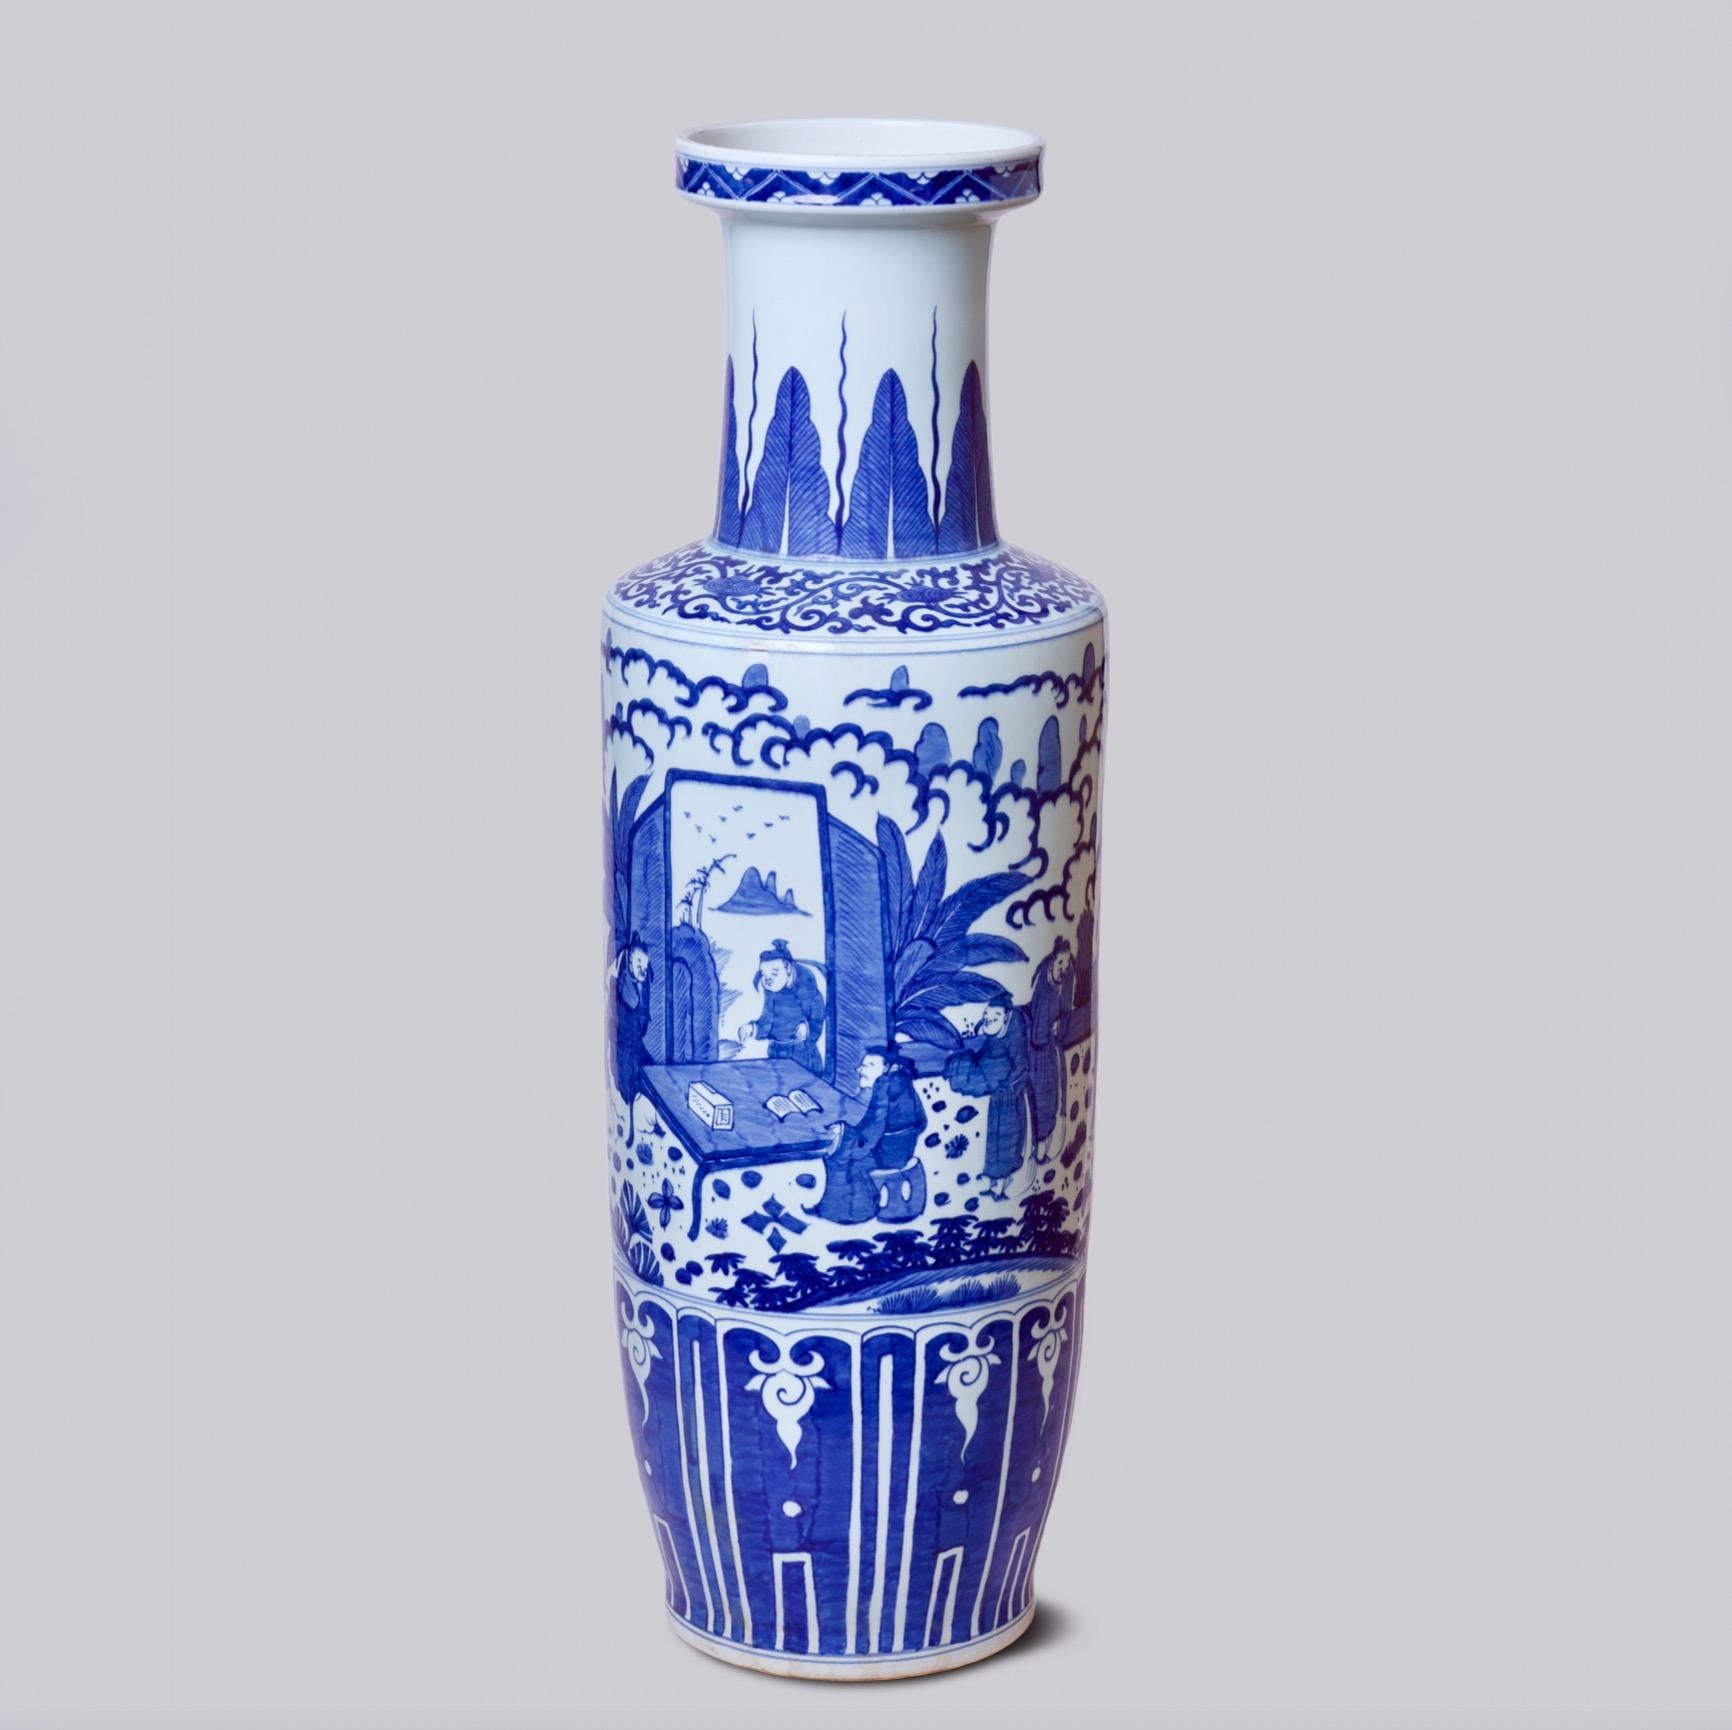 This mallet jar is a traditional porcelain vessel from Jingdezhen, a town long distinguished by imperial patronage. The lively scenes covering the entire body of the vase depict traditional scholars, or 